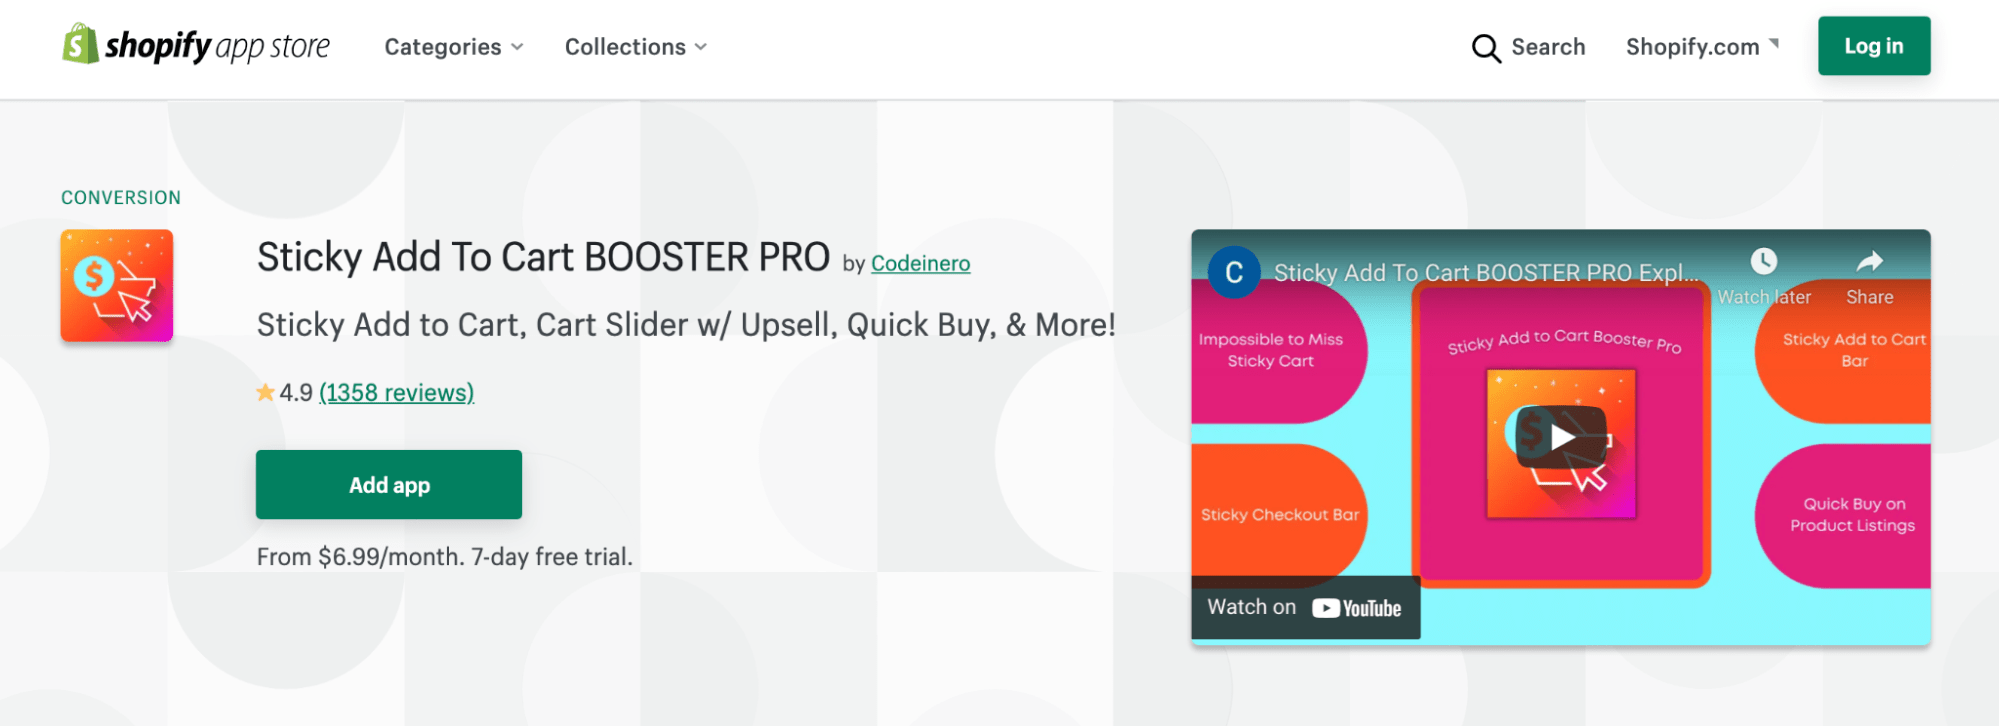 Sticky Add To Cart BOOSTER PRO